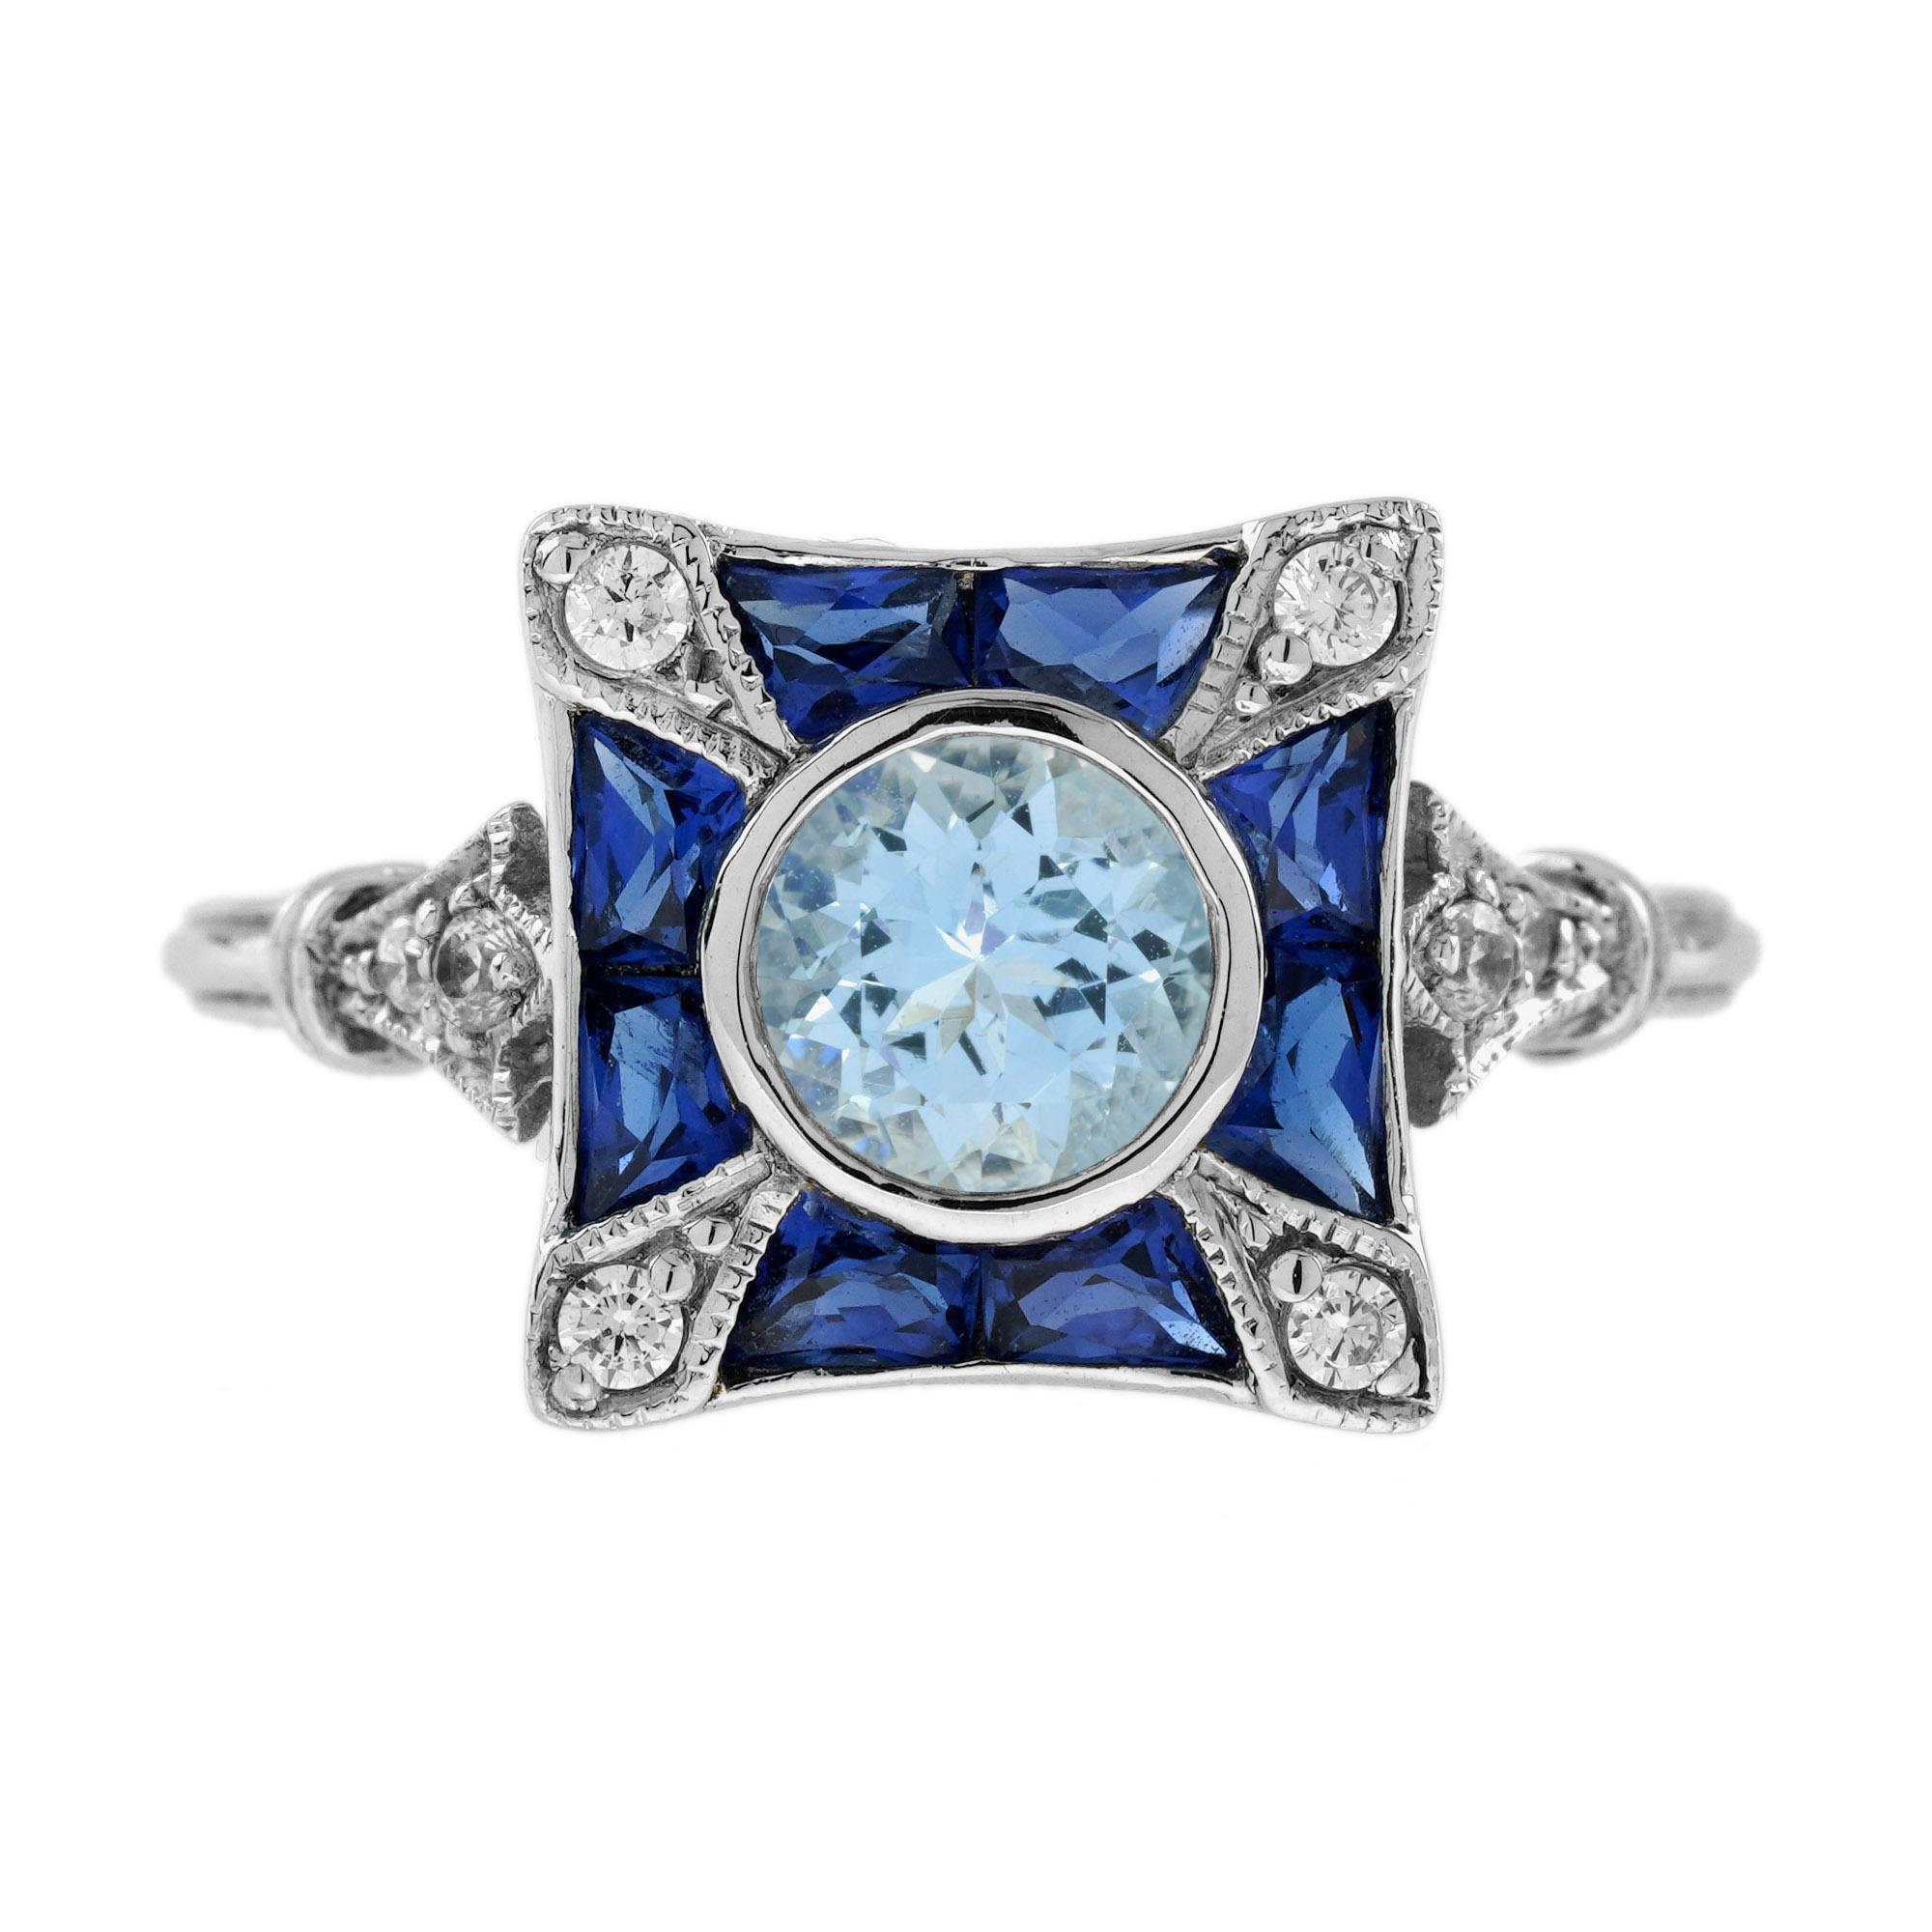 For Sale:  Aquamarine Diamond and Blue Sapphire Art Deco Style Engagement Ring in 18K Gold